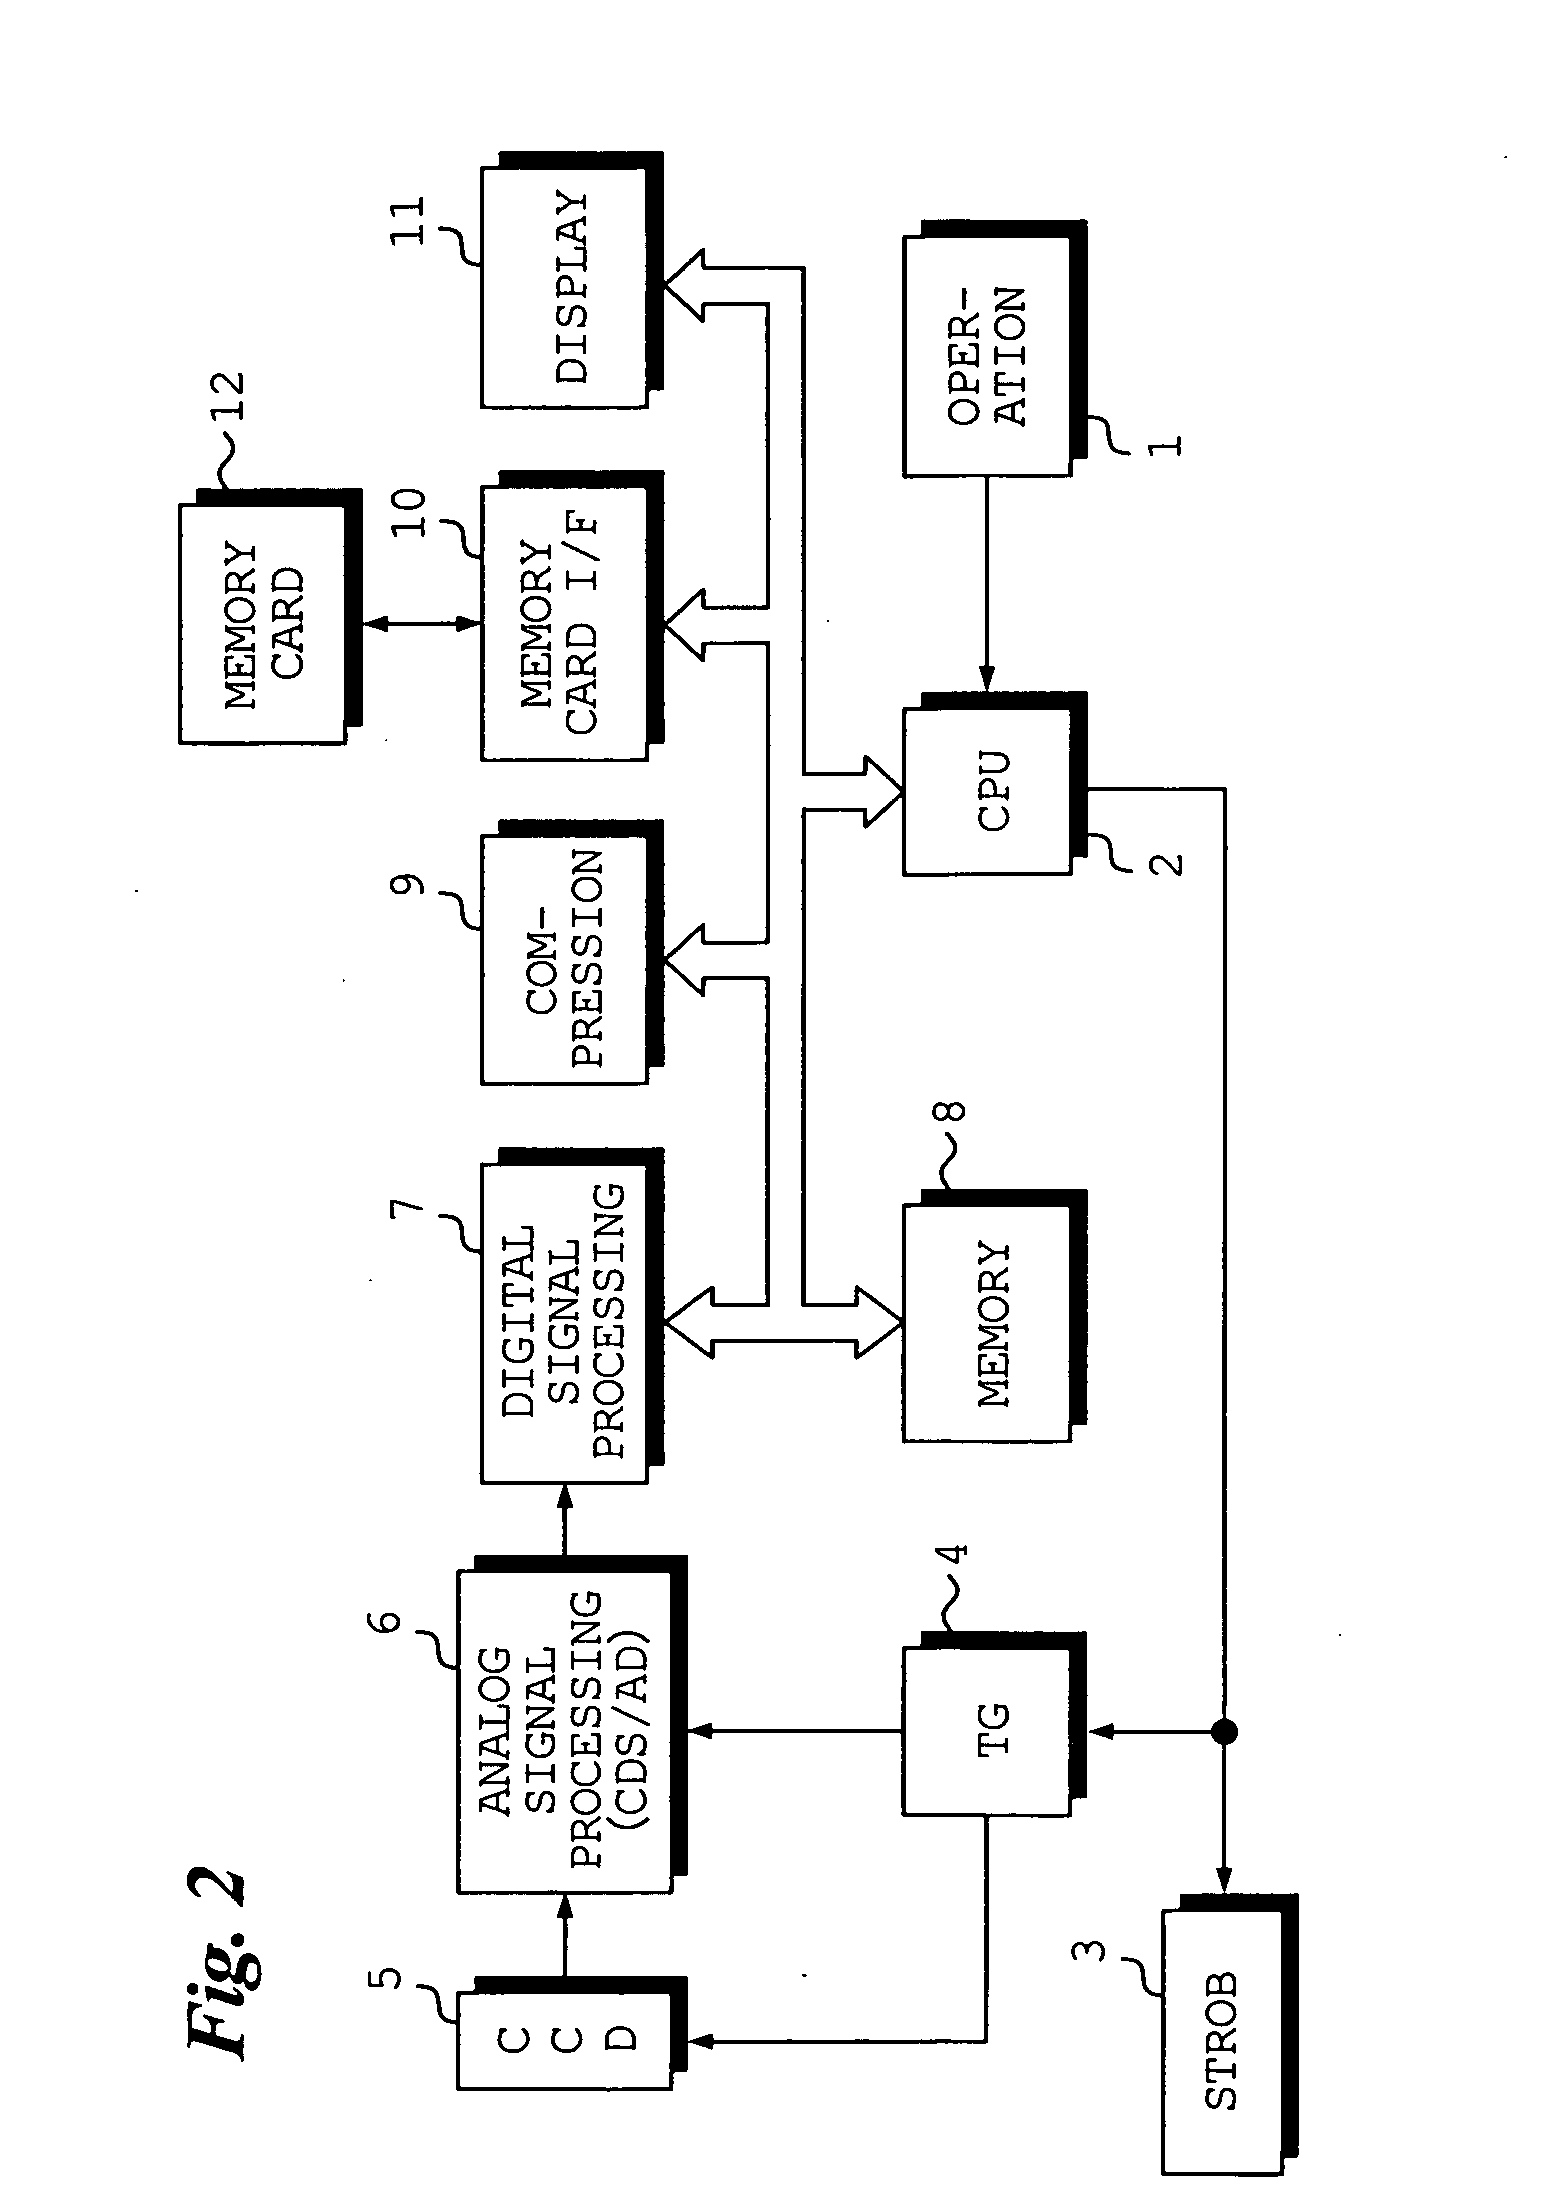 Composite image data generating apparatus, method of controlling the same, and program for controlling the same